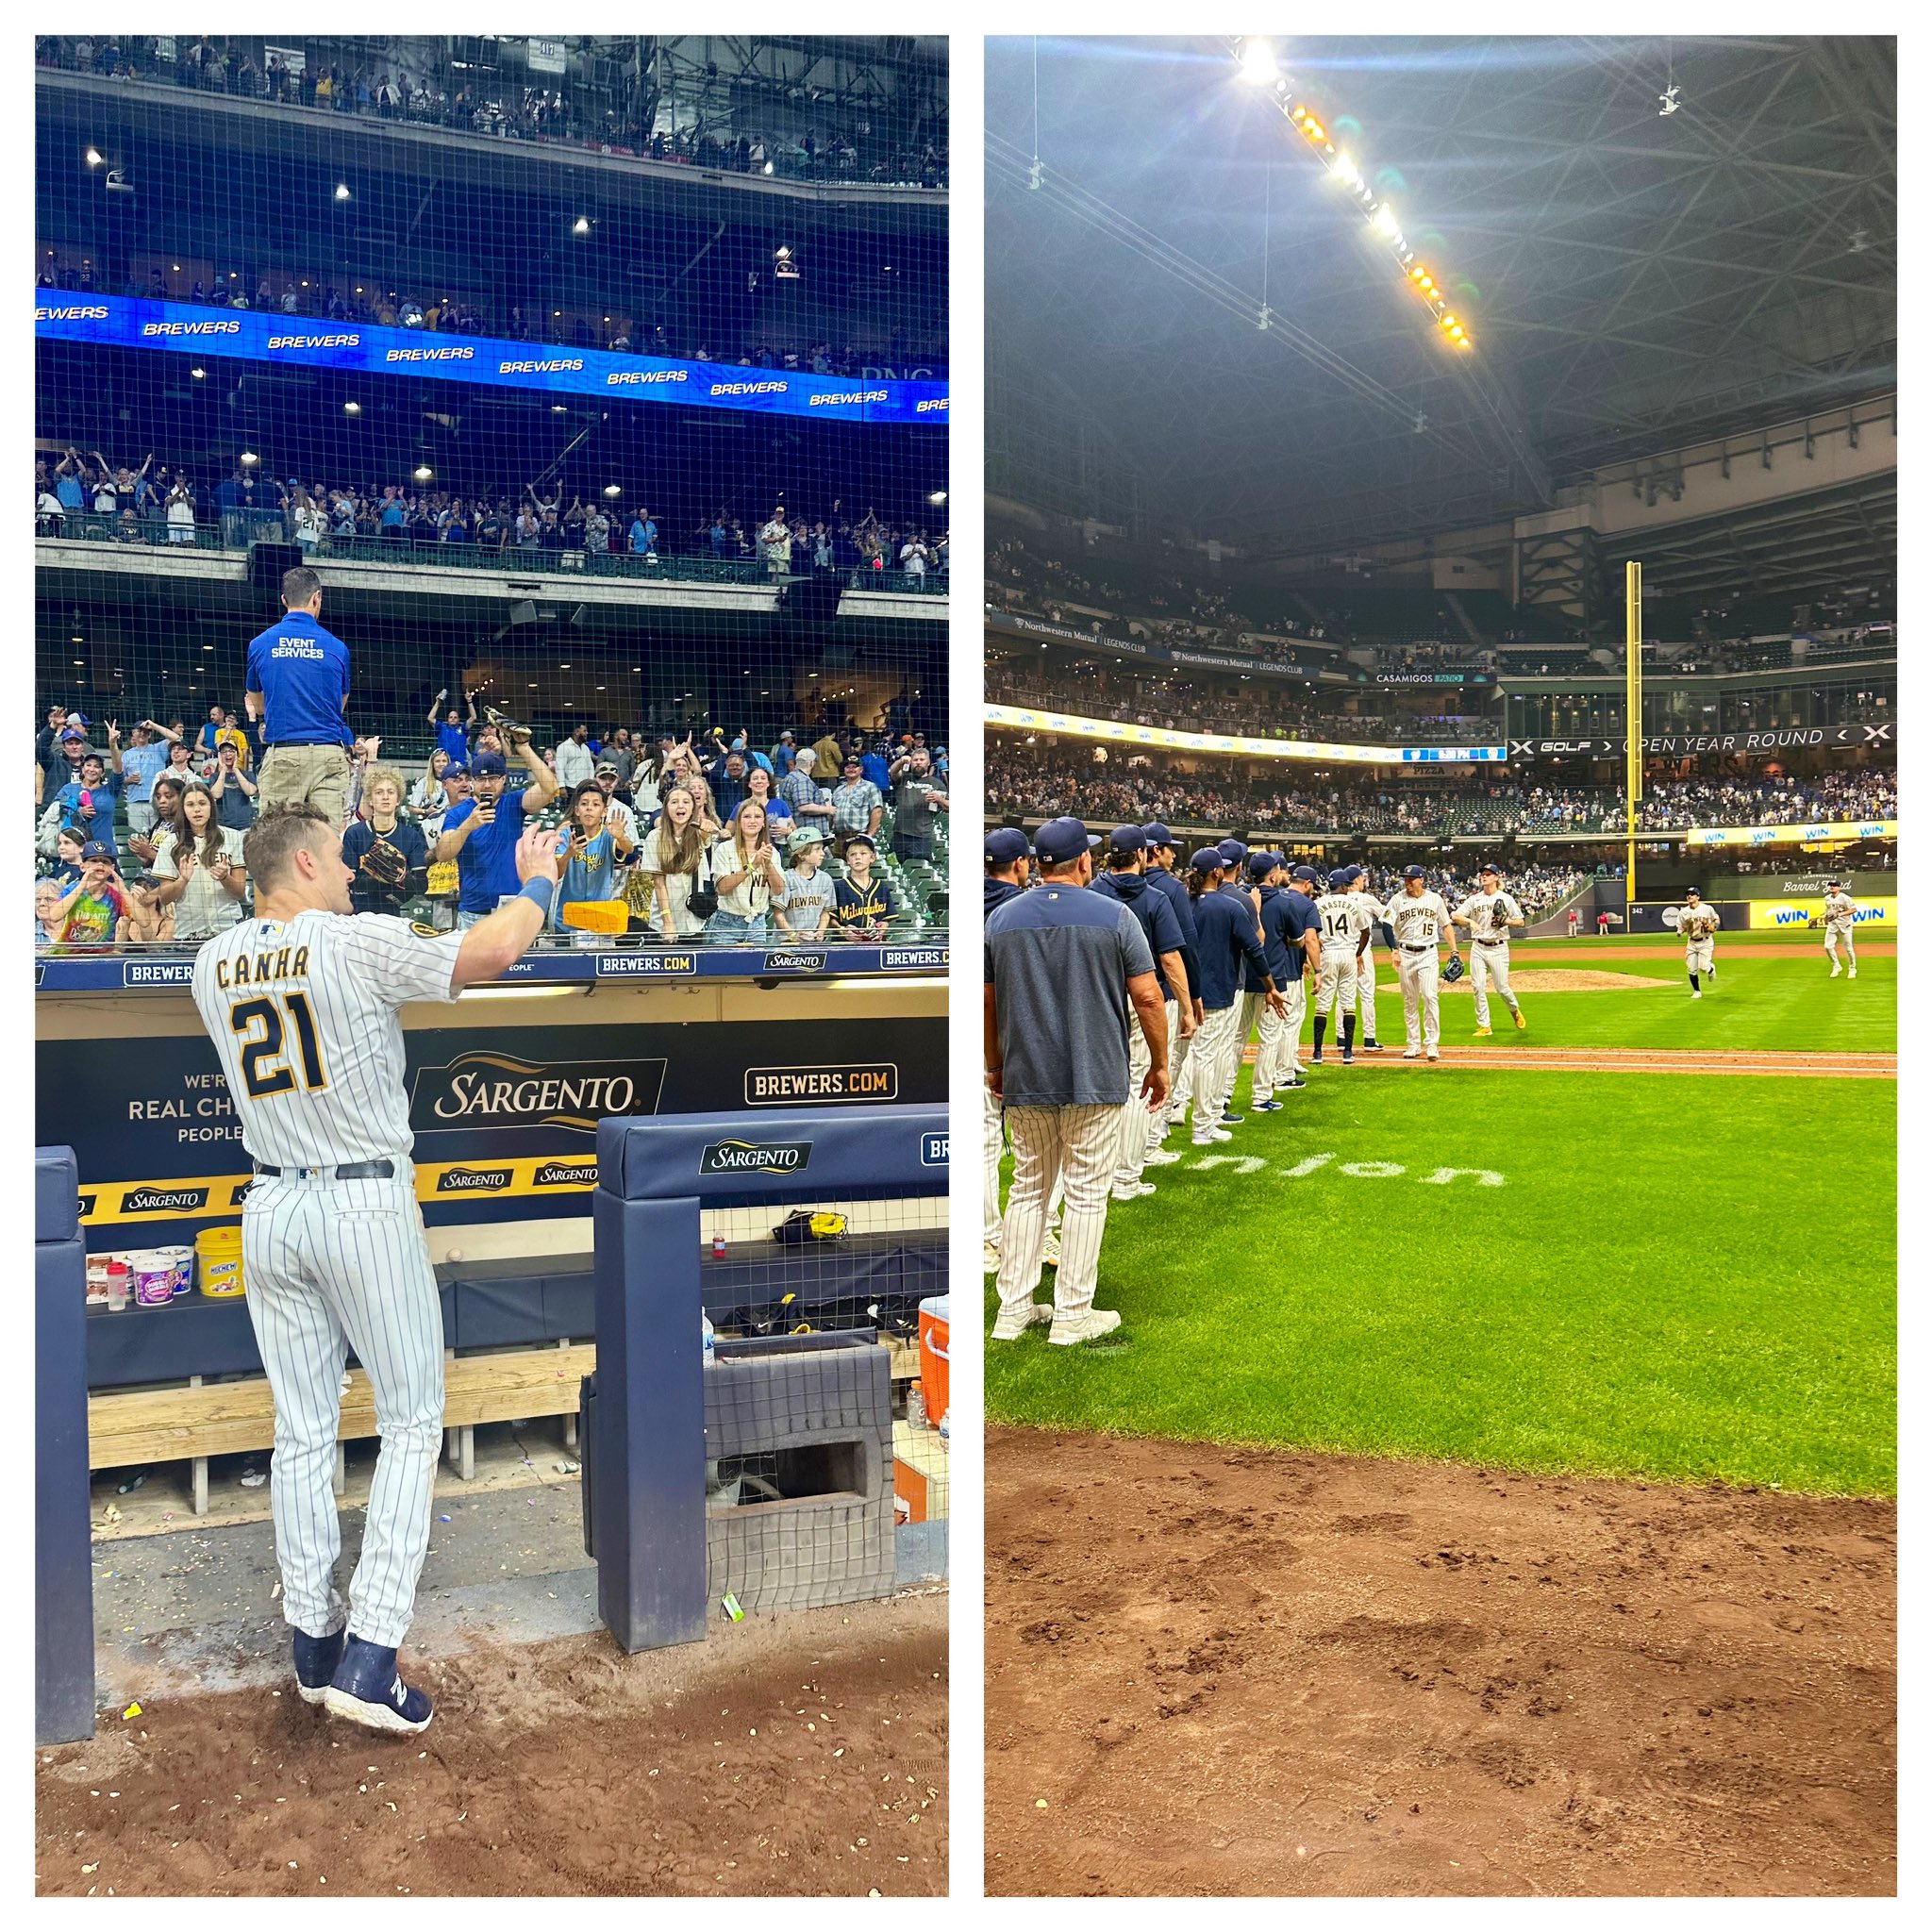 Sophia Minnaert on X: Mark Canha hit a grand slam and @Brewers are now  84-64. Division lead is now 6 games.  / X